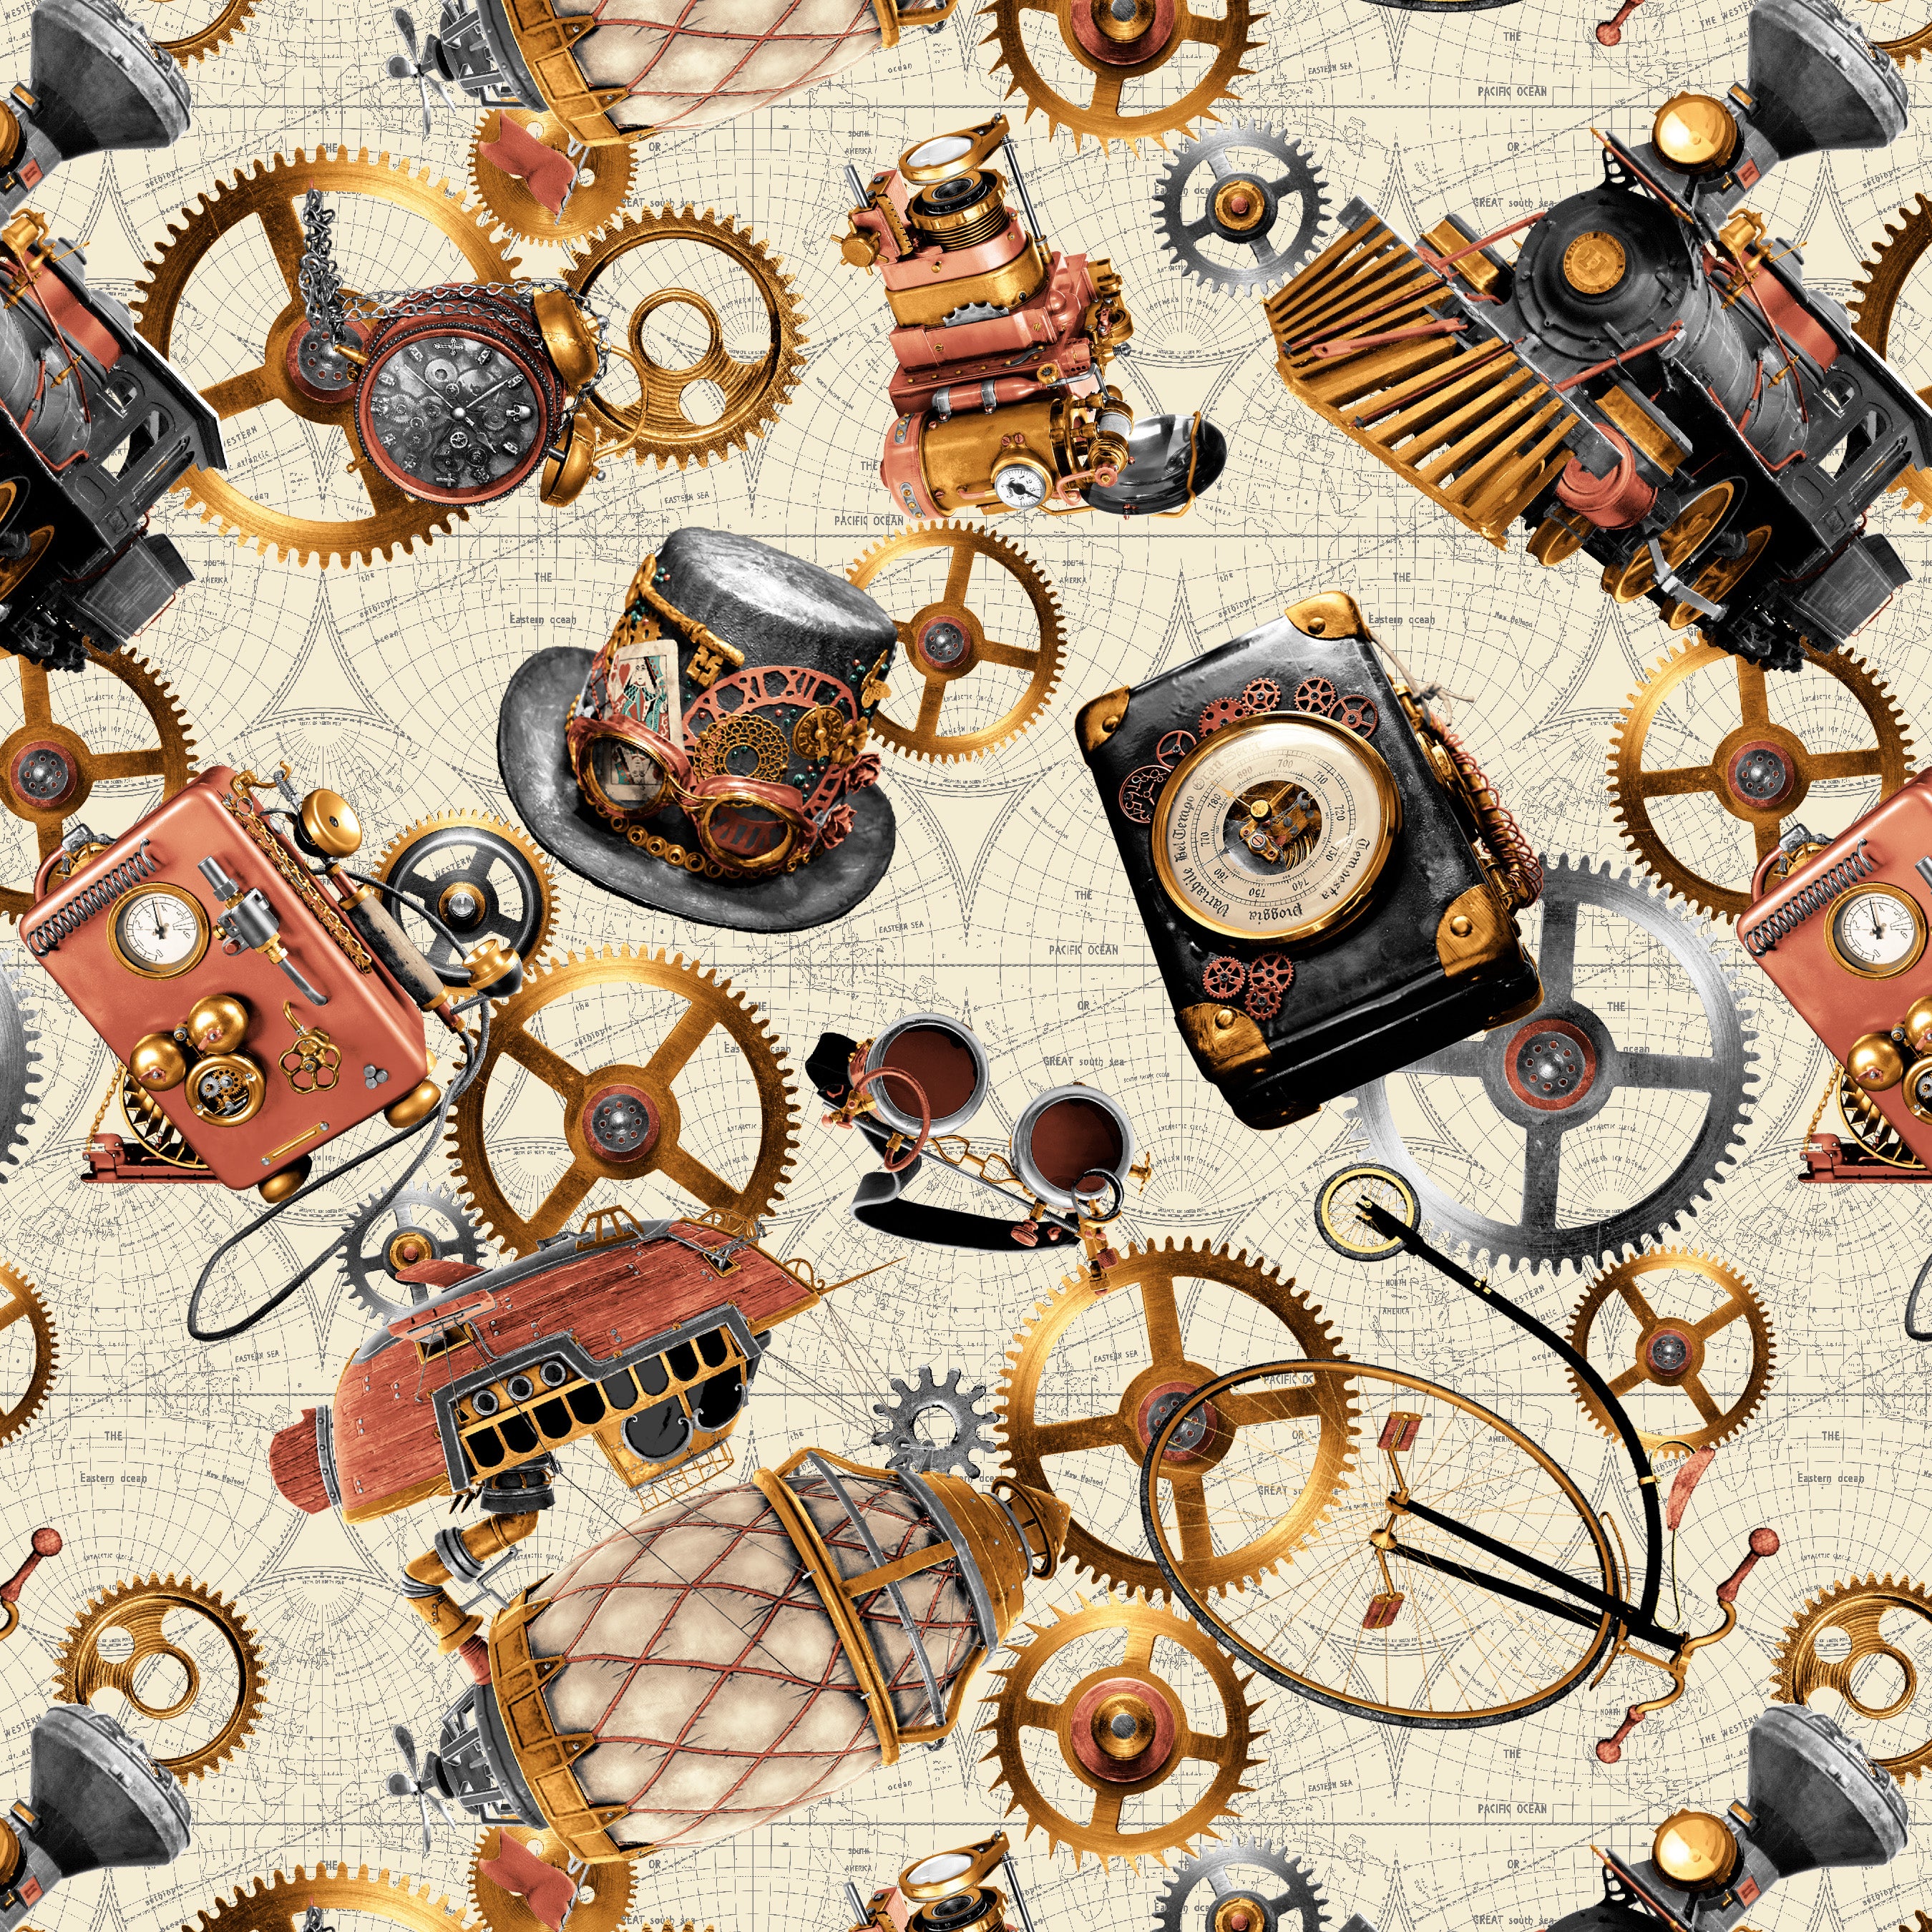 Textile Design Guide: Novelty, Whimsical, Steampunk, Retro